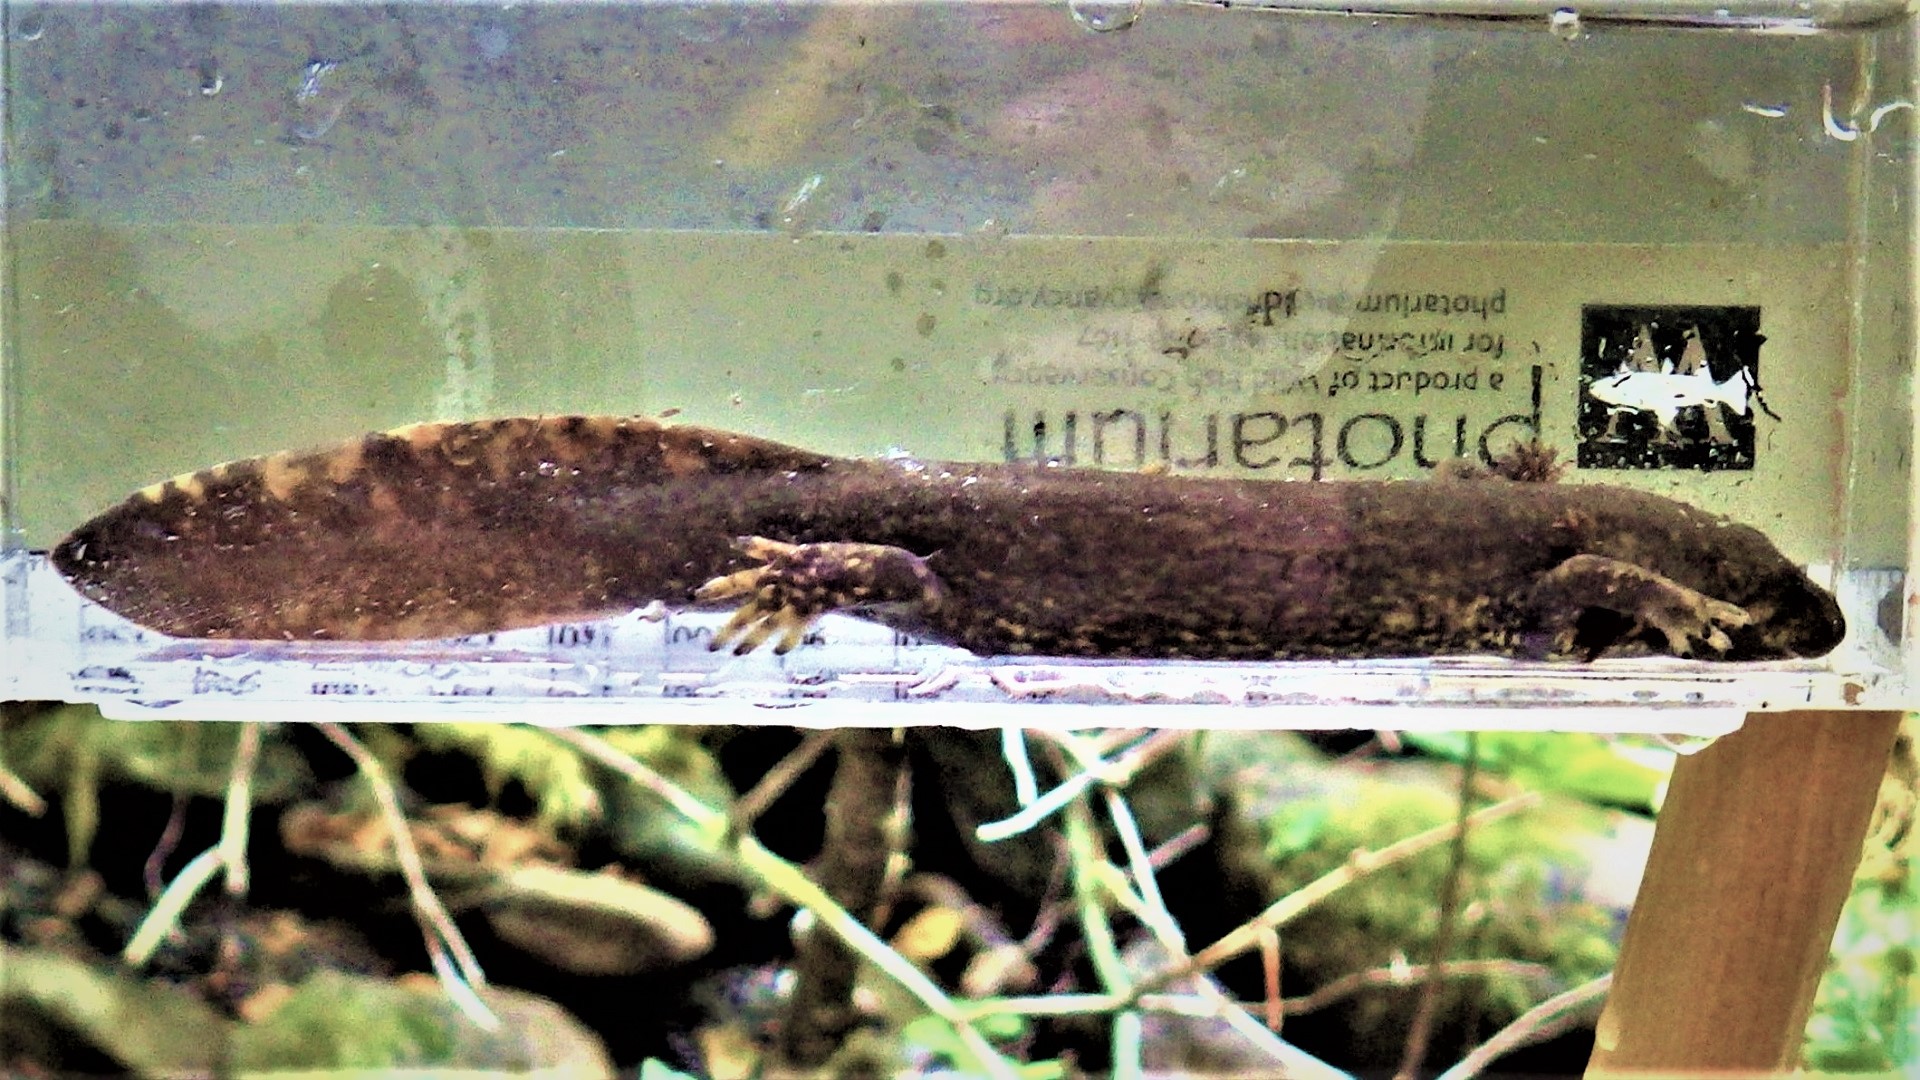 A salamander in a clear container